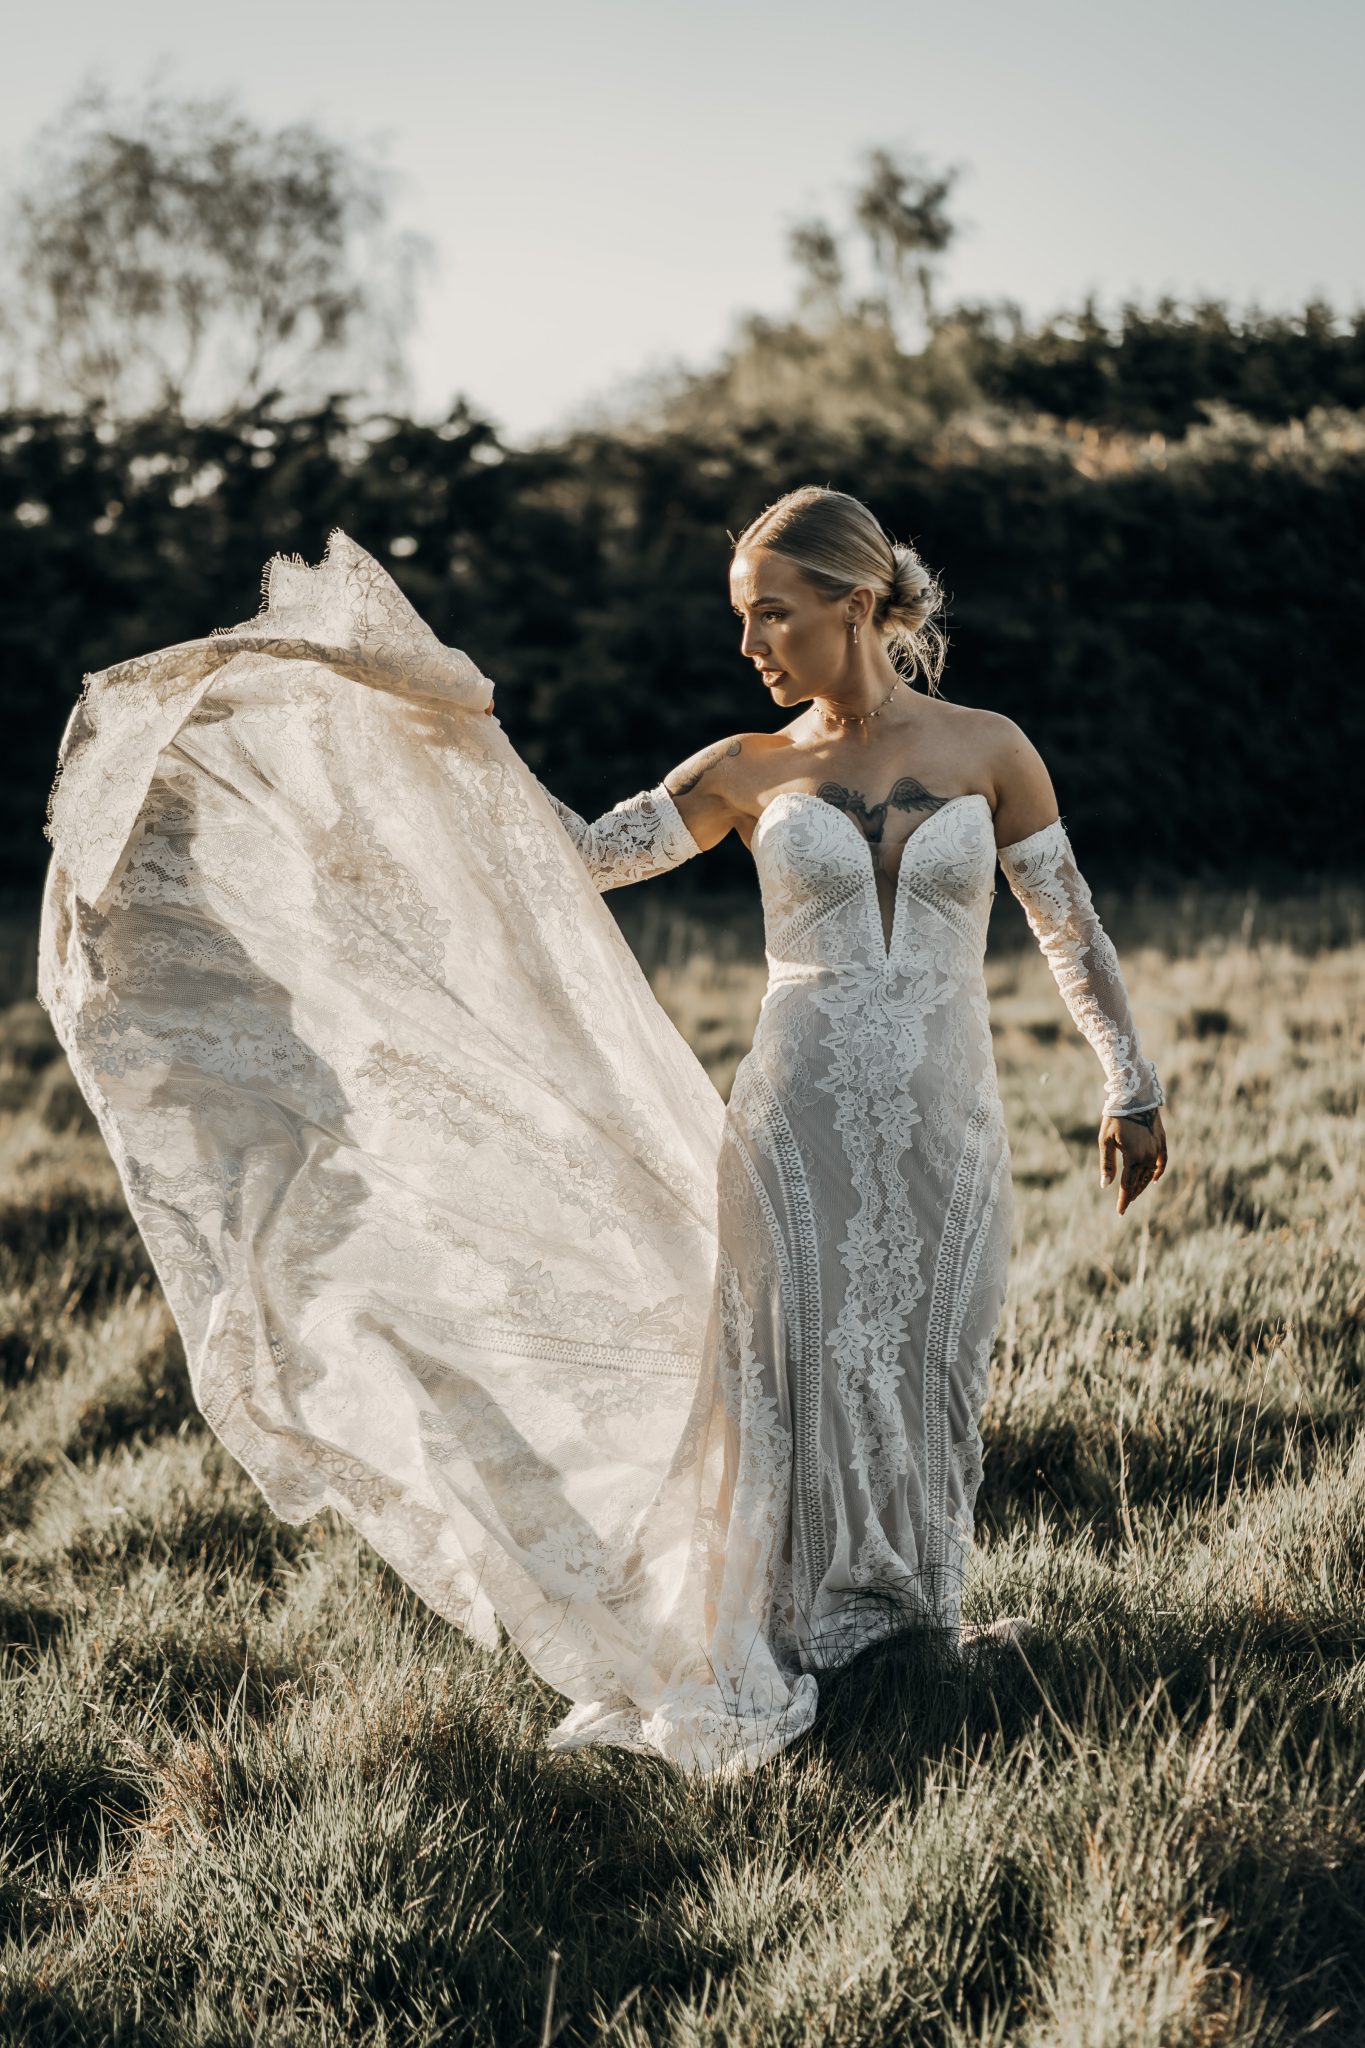 Cain Manor bridal gown